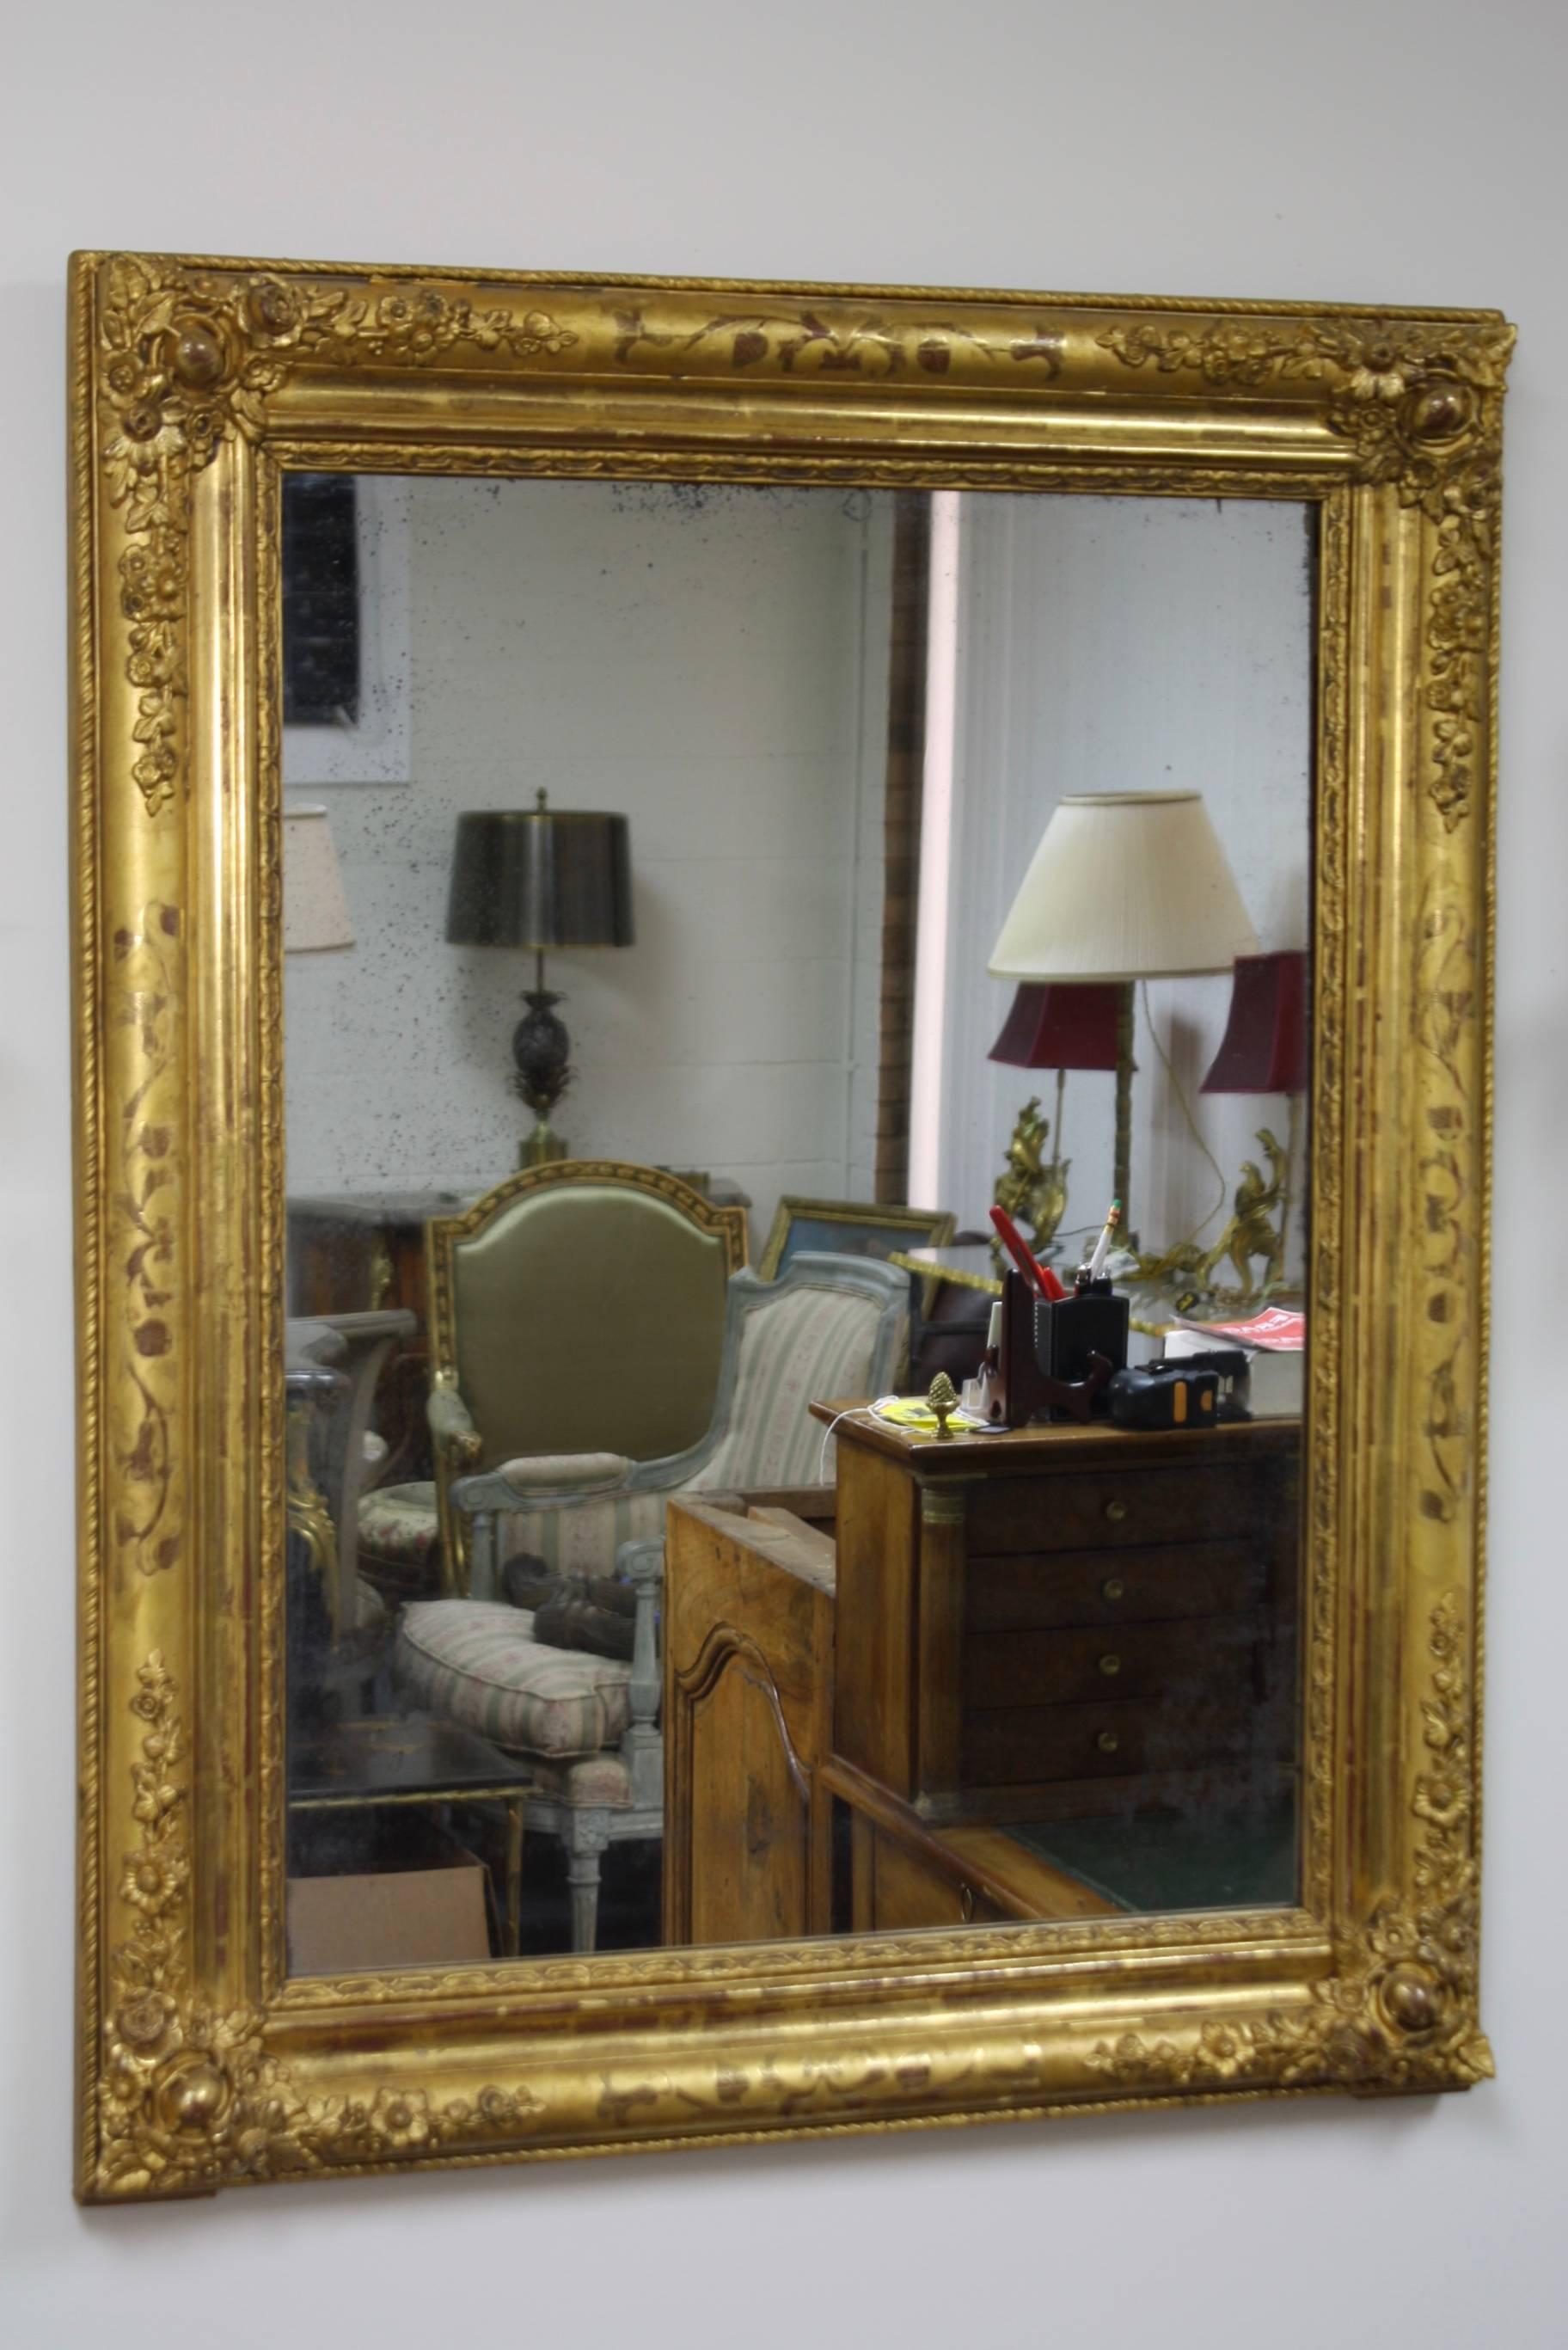 Beautiful French giltwood mirror from the Charles X period, (circa 1830). The mirror features carved floral details in the corners and vine design on the sides. Nice old mercury glass shows its age and could be original. The mirror has an old wood